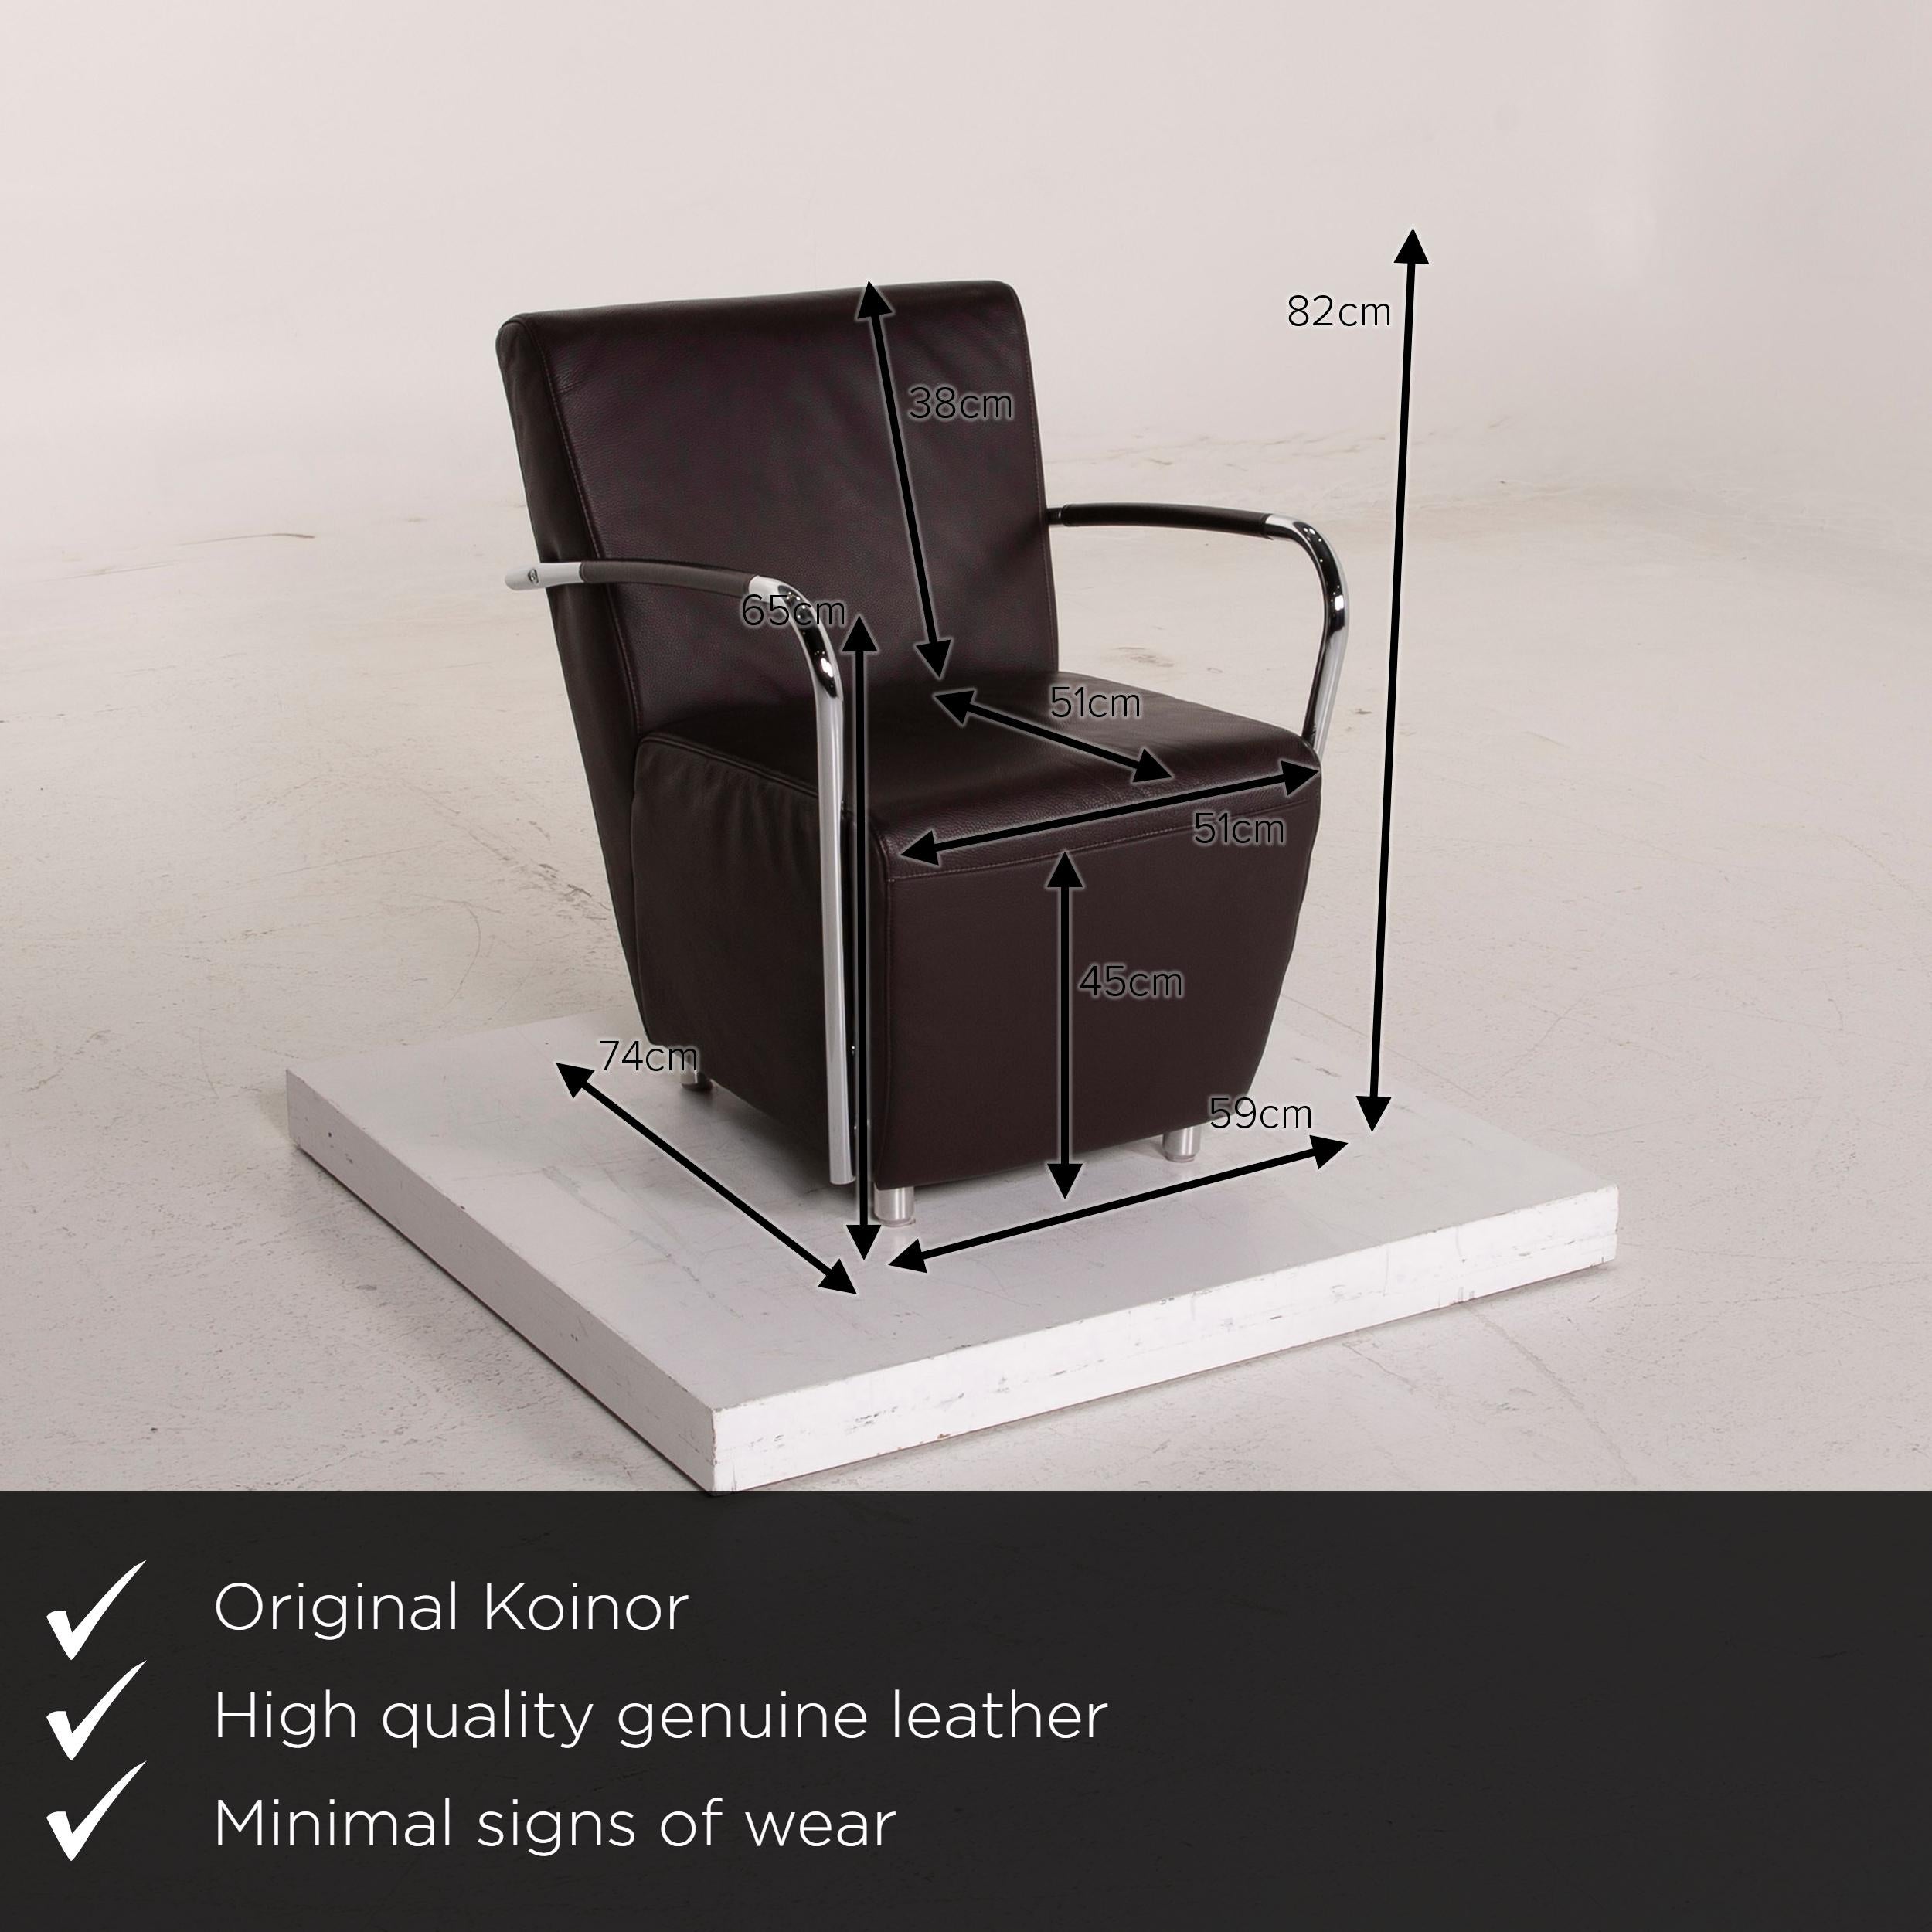 We present to you a Koinor Goya leather armchair dark brown metal.

 

 Product measurements in centimeters:
 

Depth 74
Width 59
Height 82
Seat height 45
Rest height 65
Seat depth 51
Seat width 51
Back height 37.
  